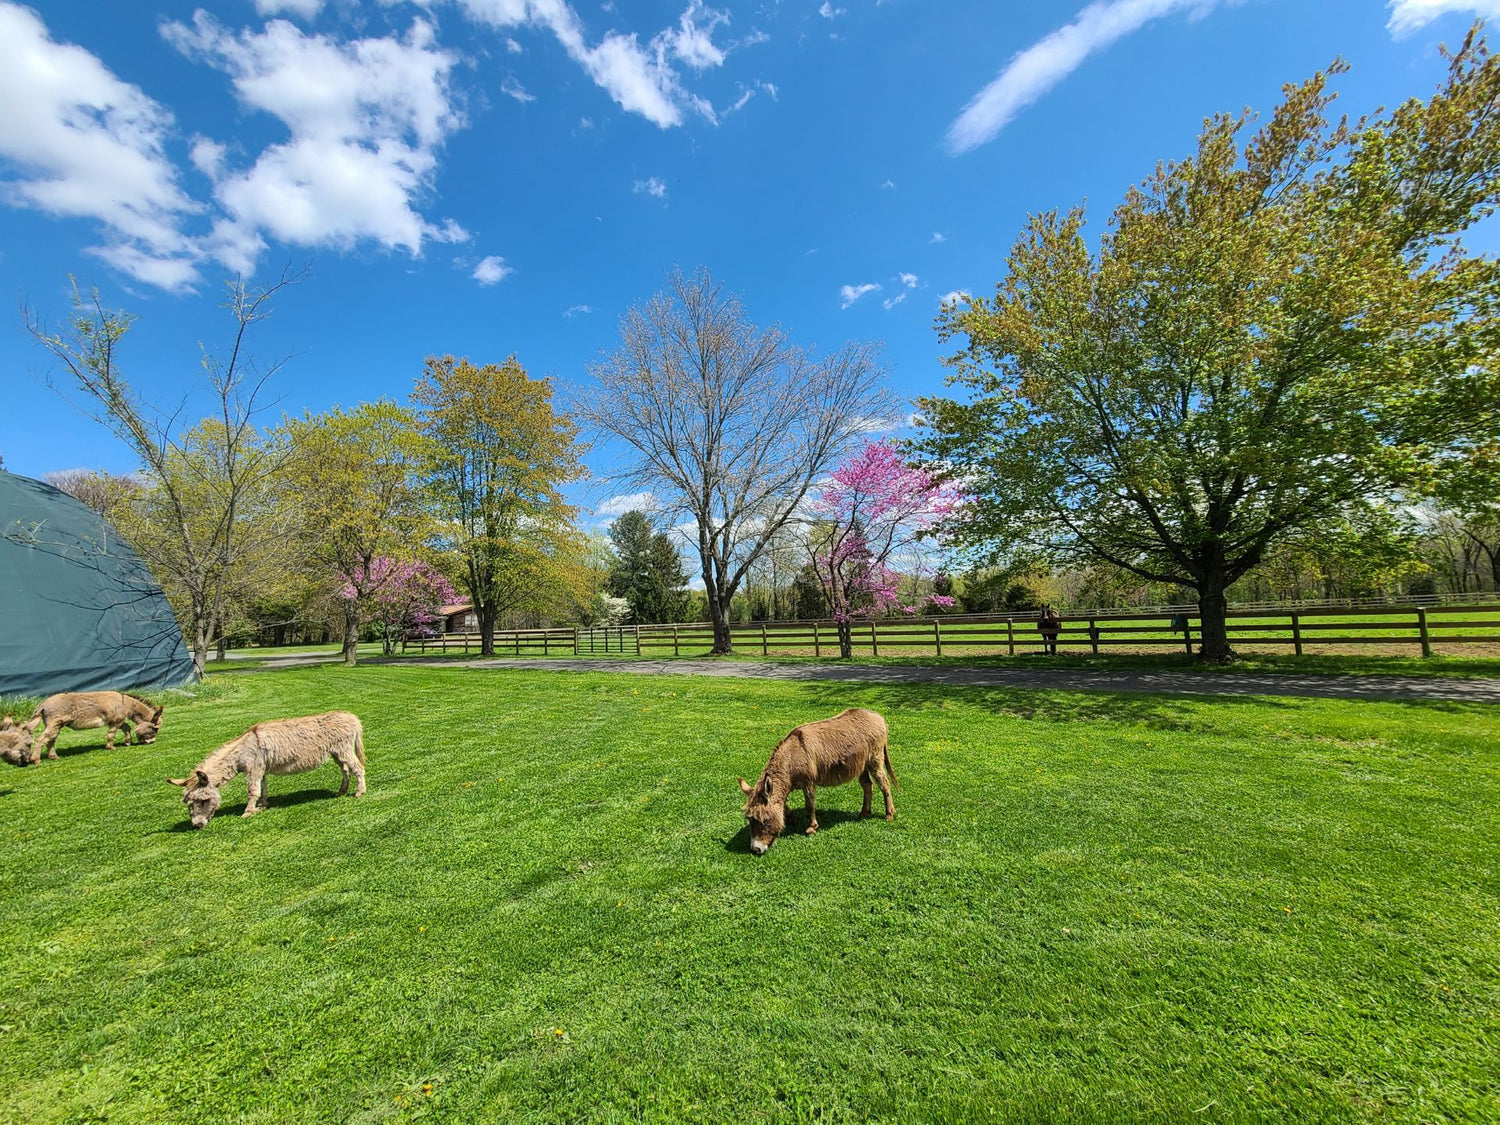 Miniature Donkeys in a green grassy field on a farm. Spring Time